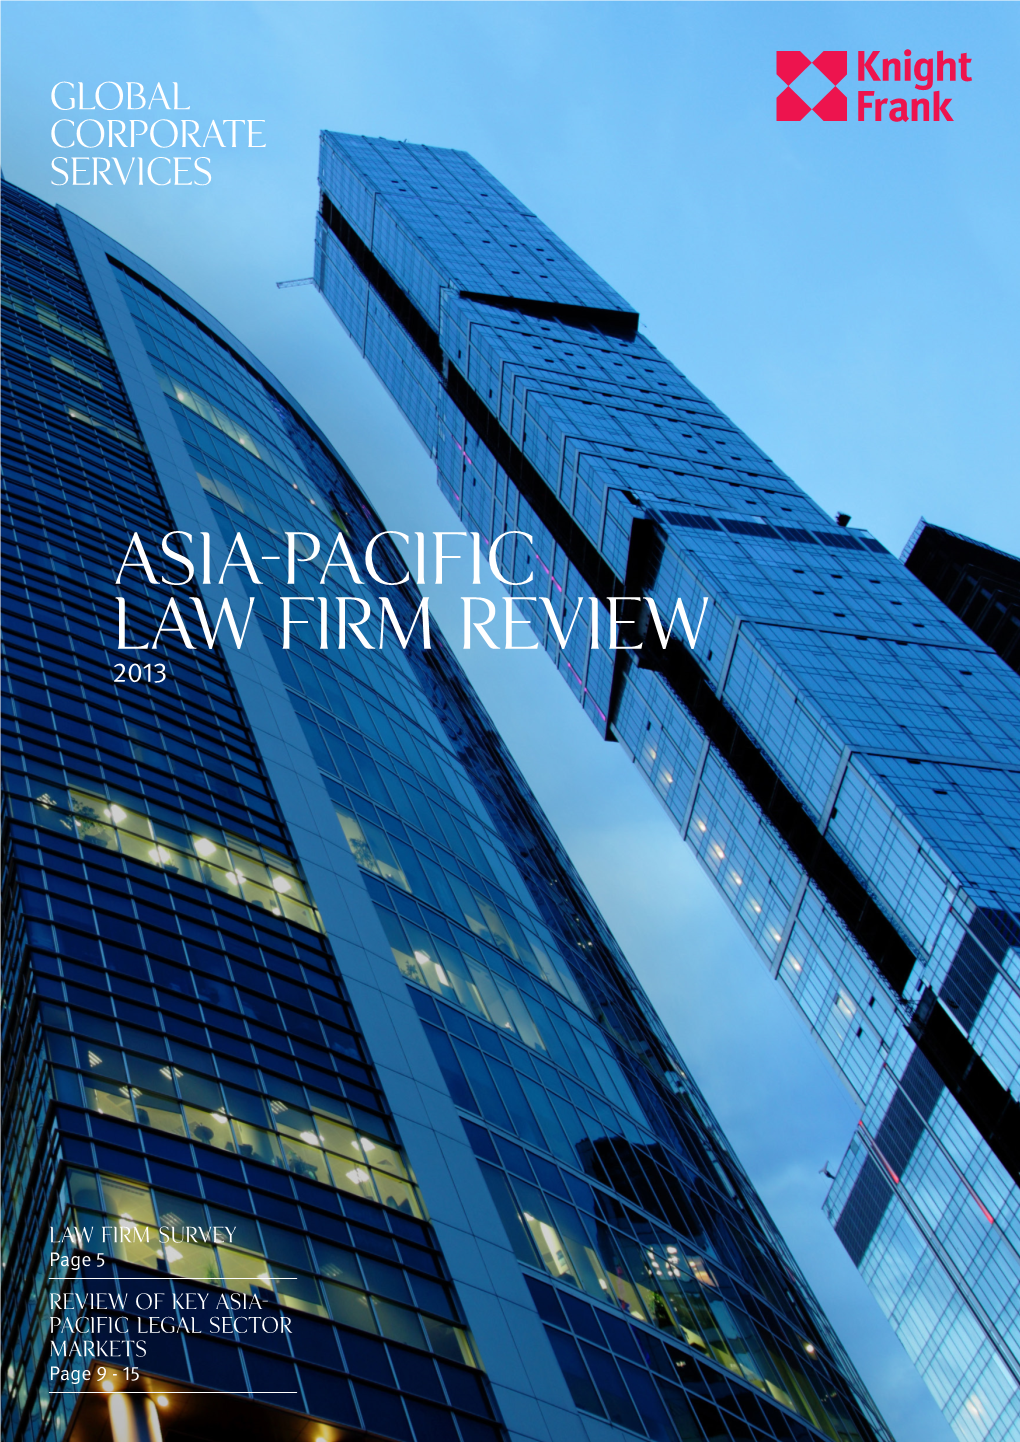 ASIA-PACIFIC Law Firm Review 2013